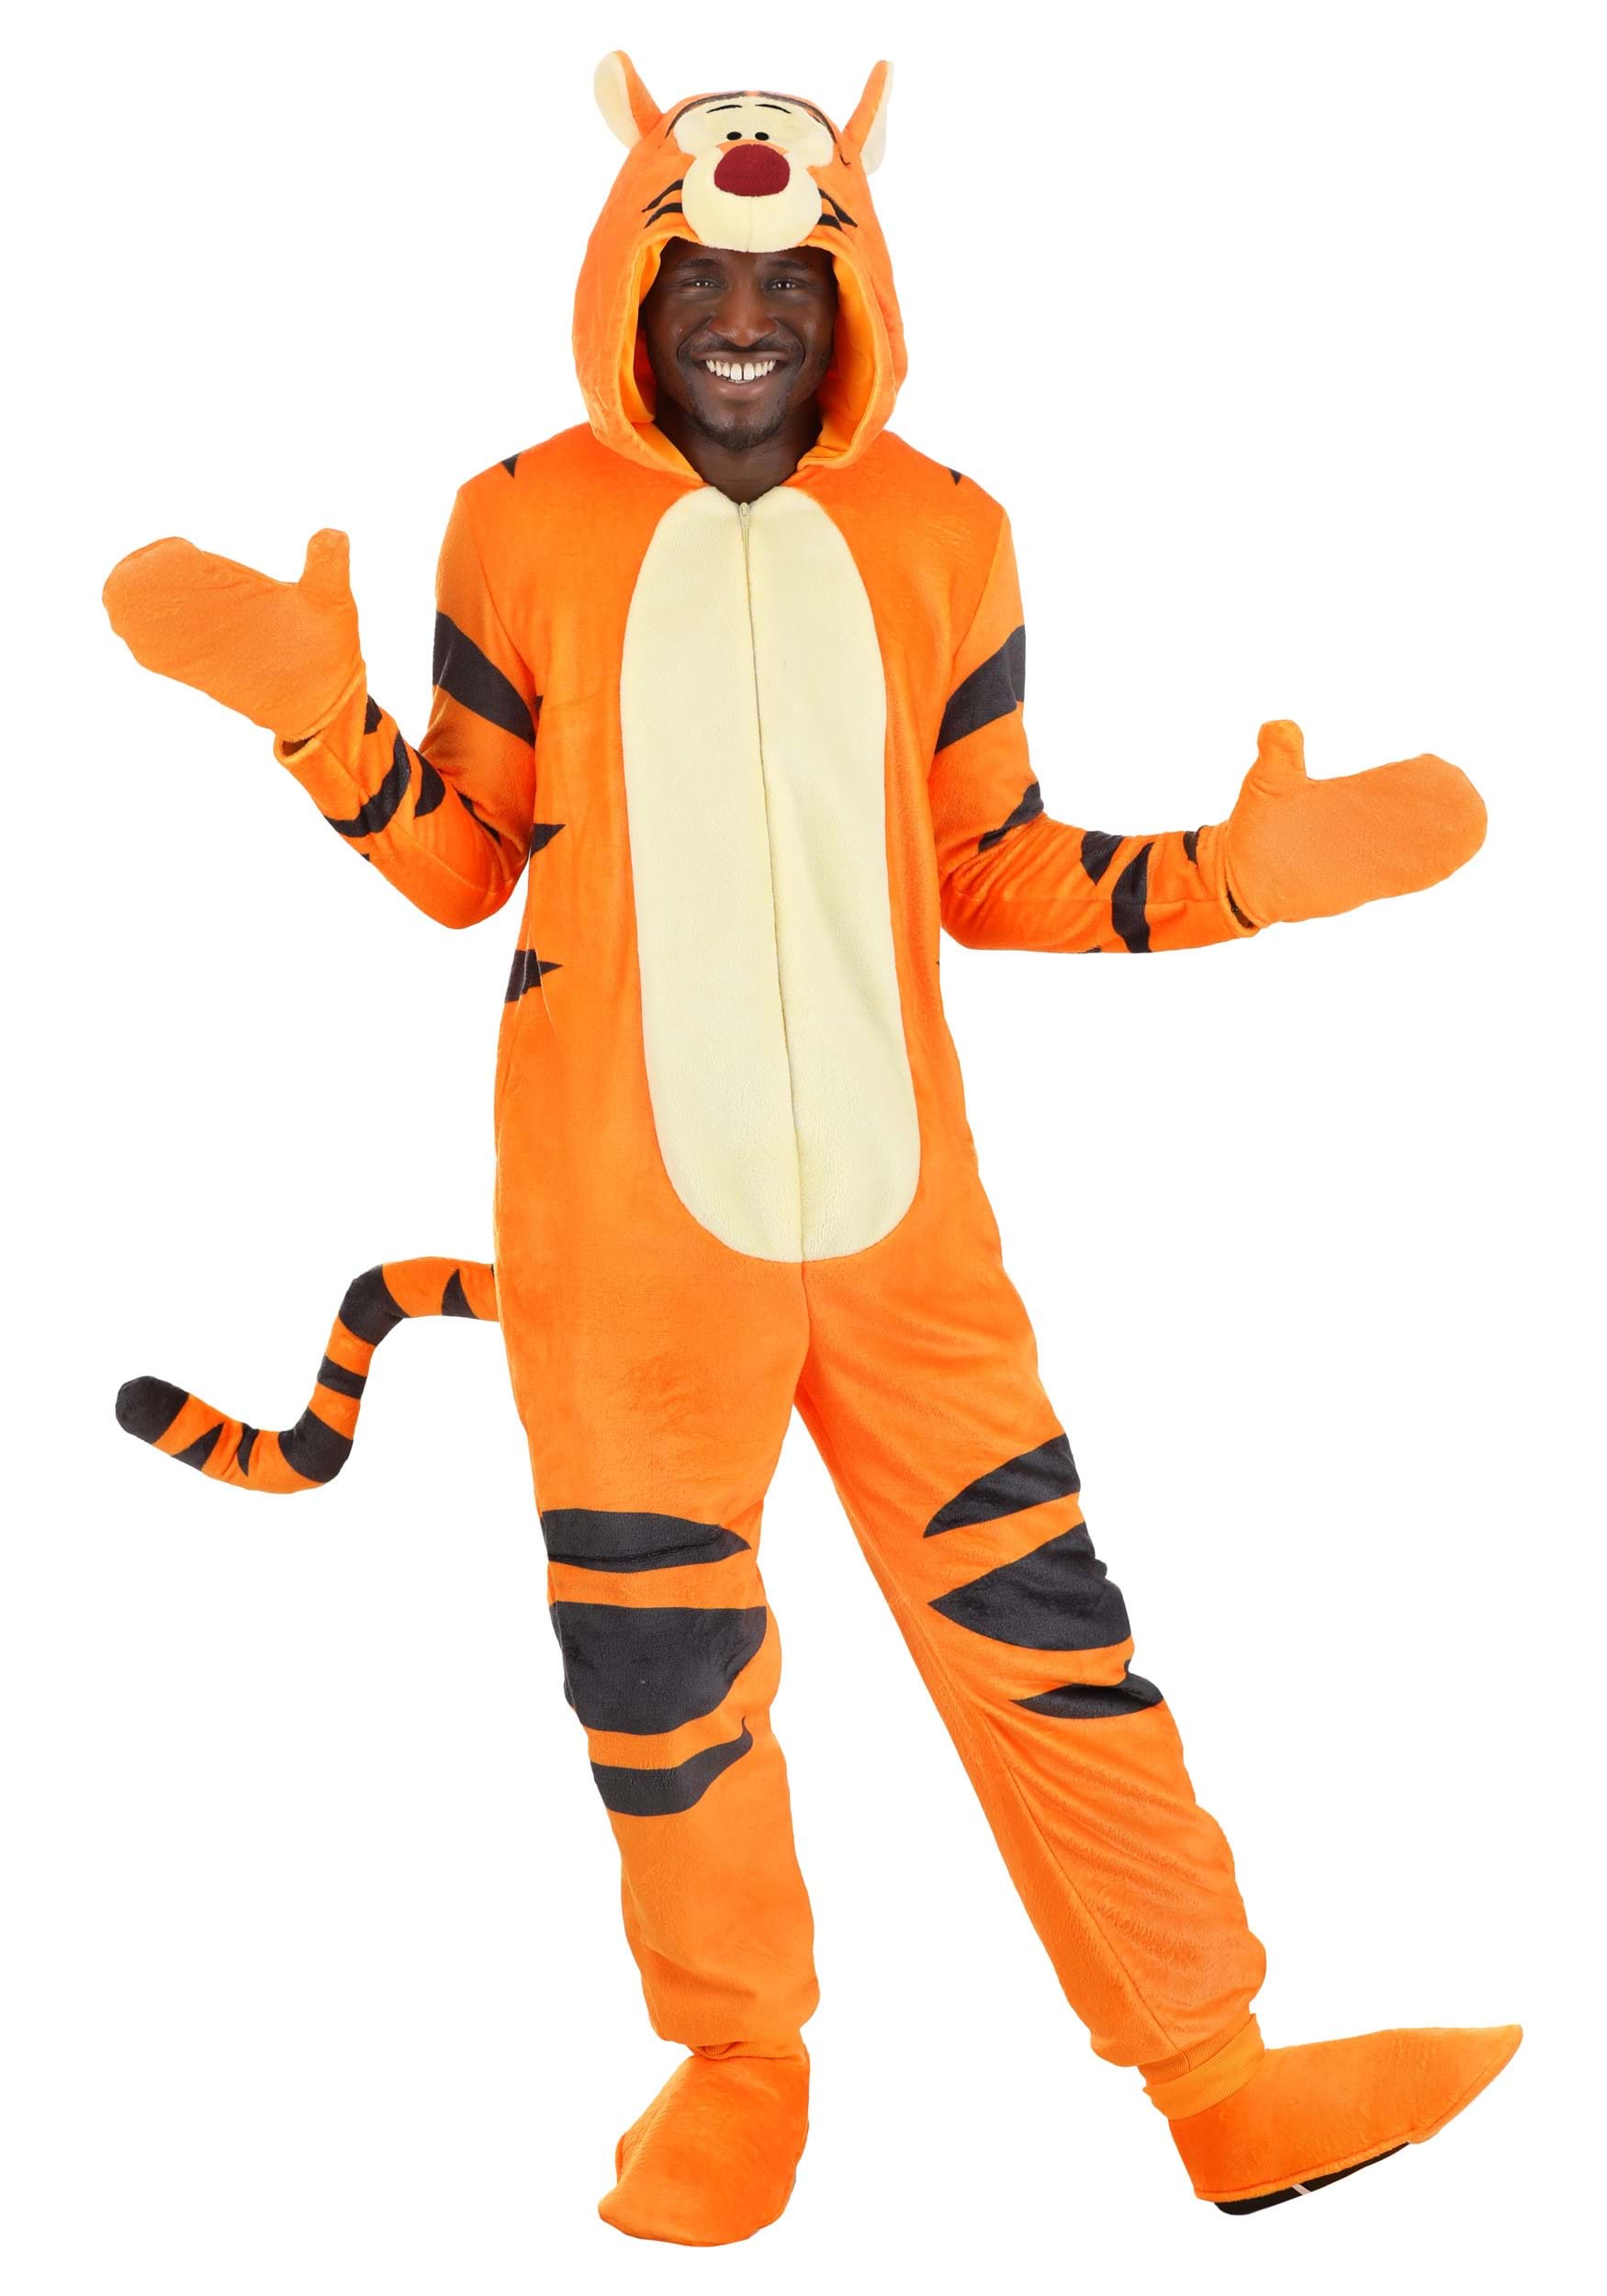 Image of Deluxe Disney Tigger Costume for Adults ID FUN4716AD-L